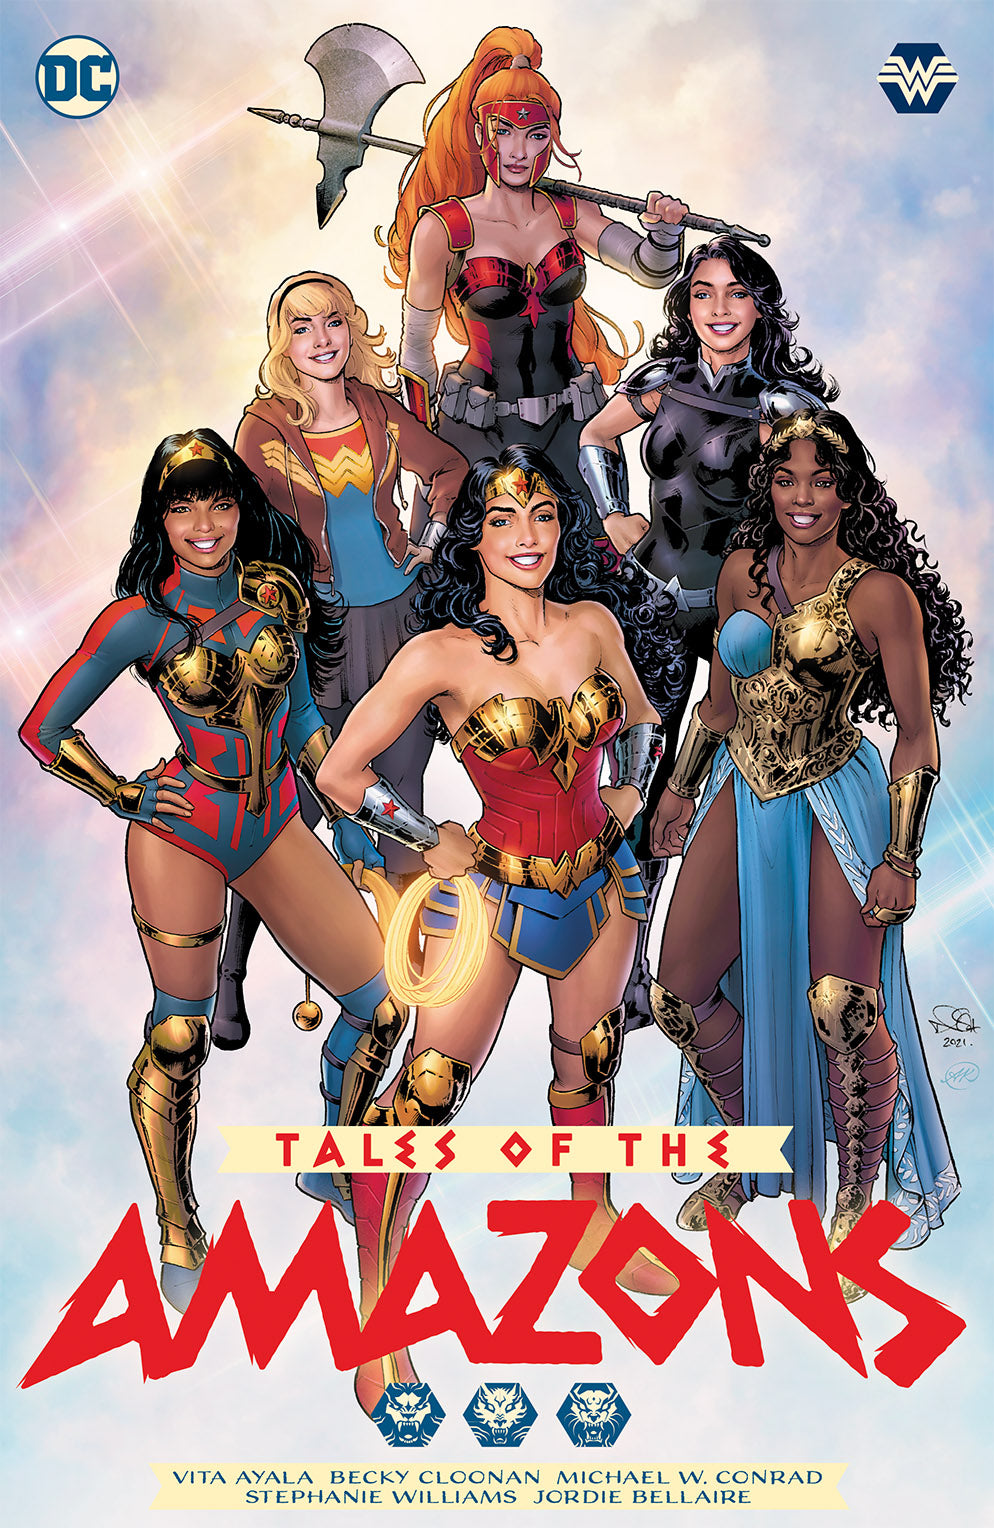 TALES OF THE AMAZONS HARDCOVER